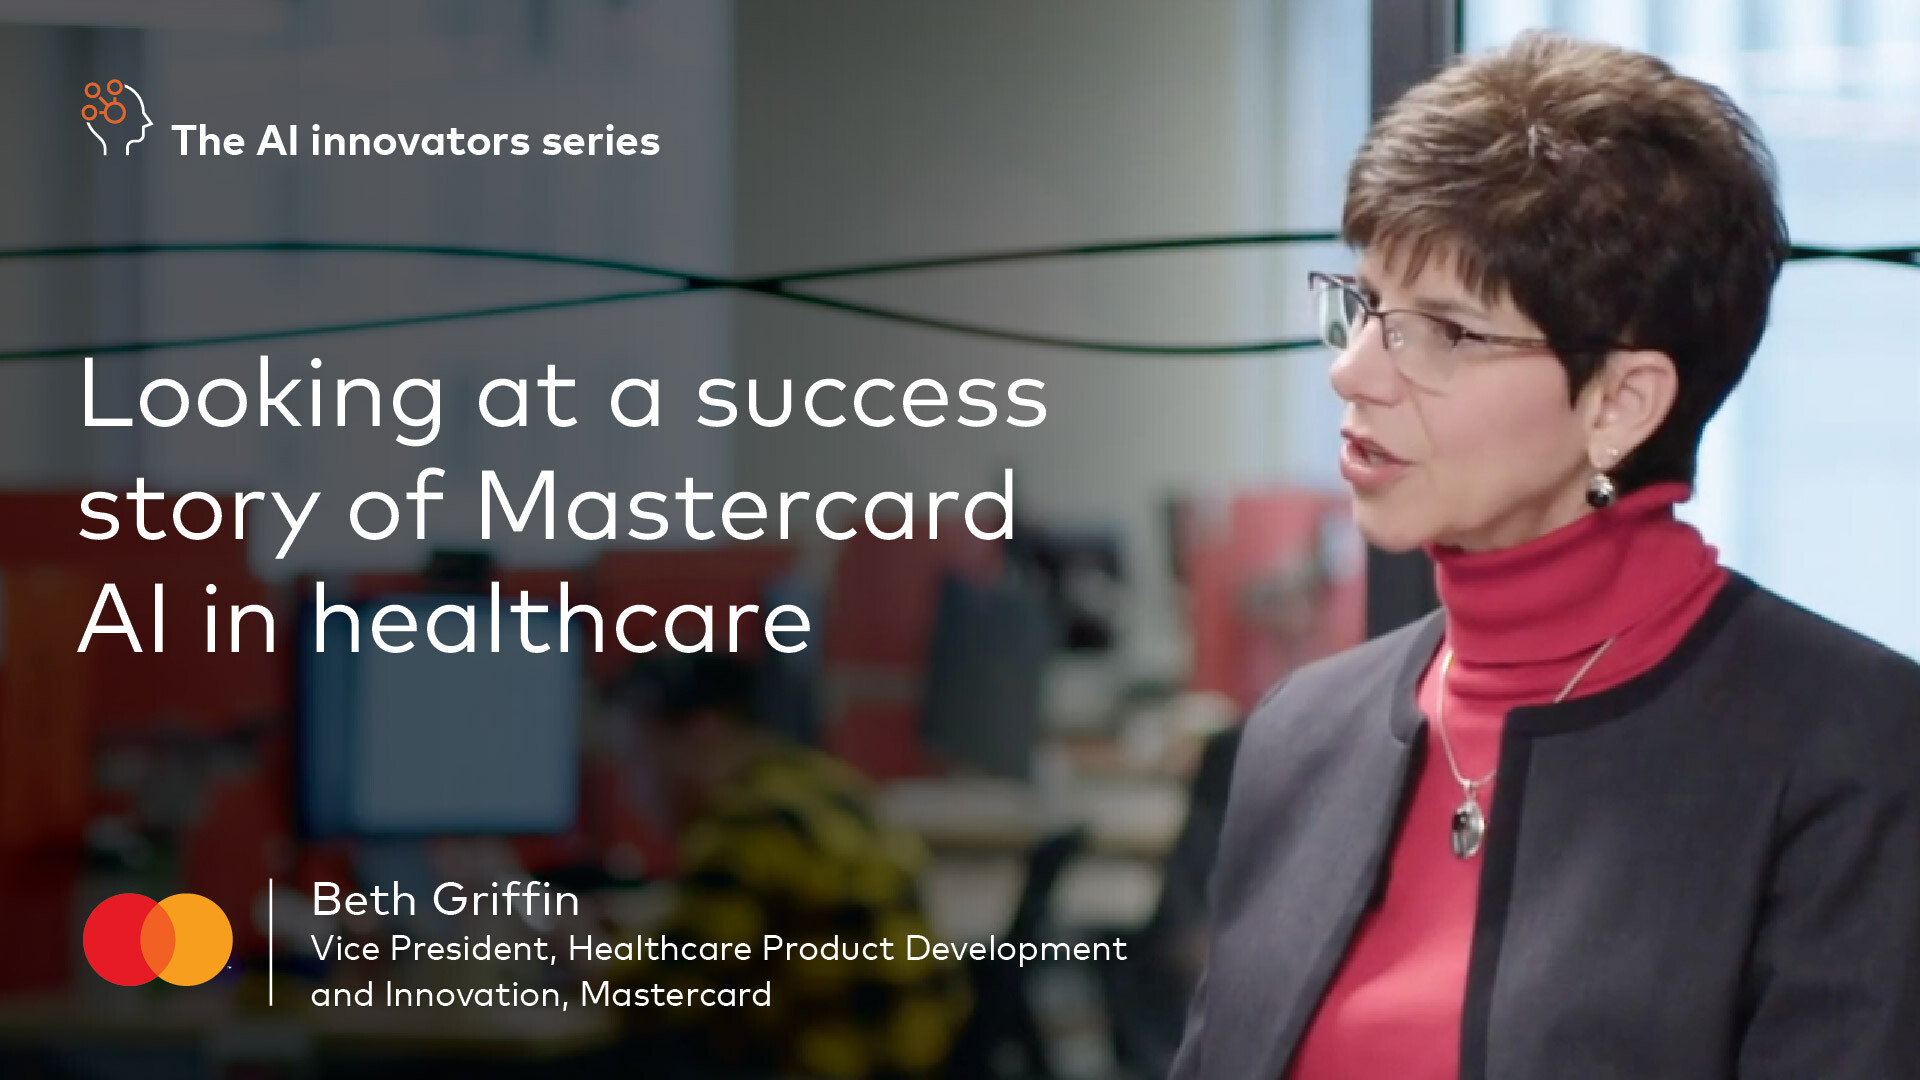 Looking at a success story of Mastercard AI in healthcare